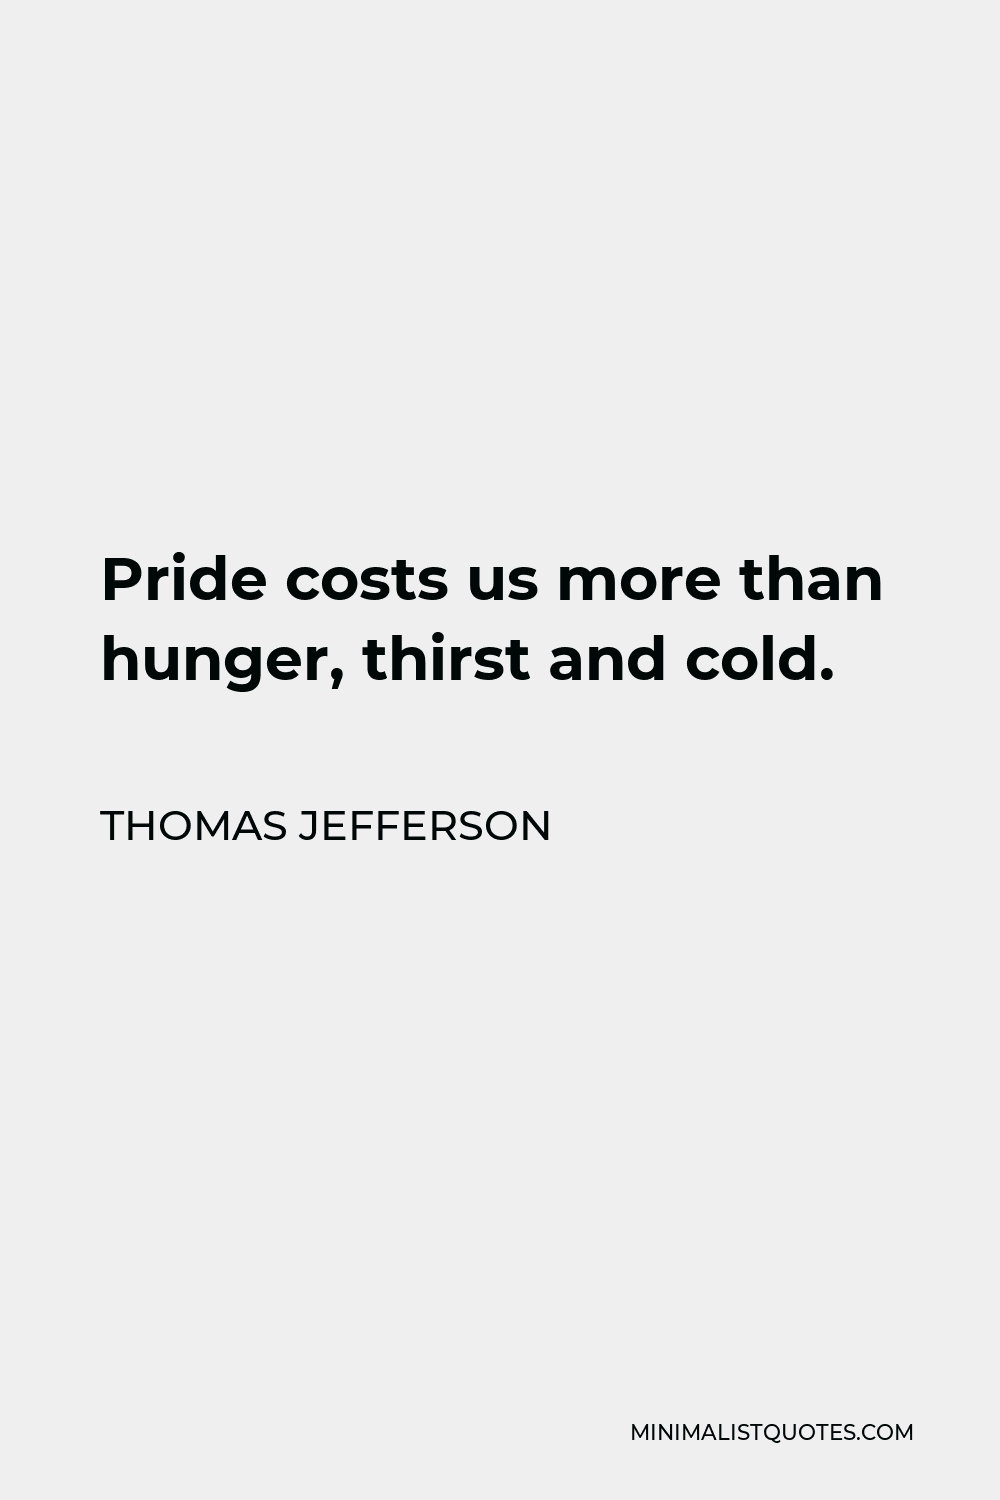 Thomas Jefferson Quote - Pride costs us more than hunger, thirst and cold.